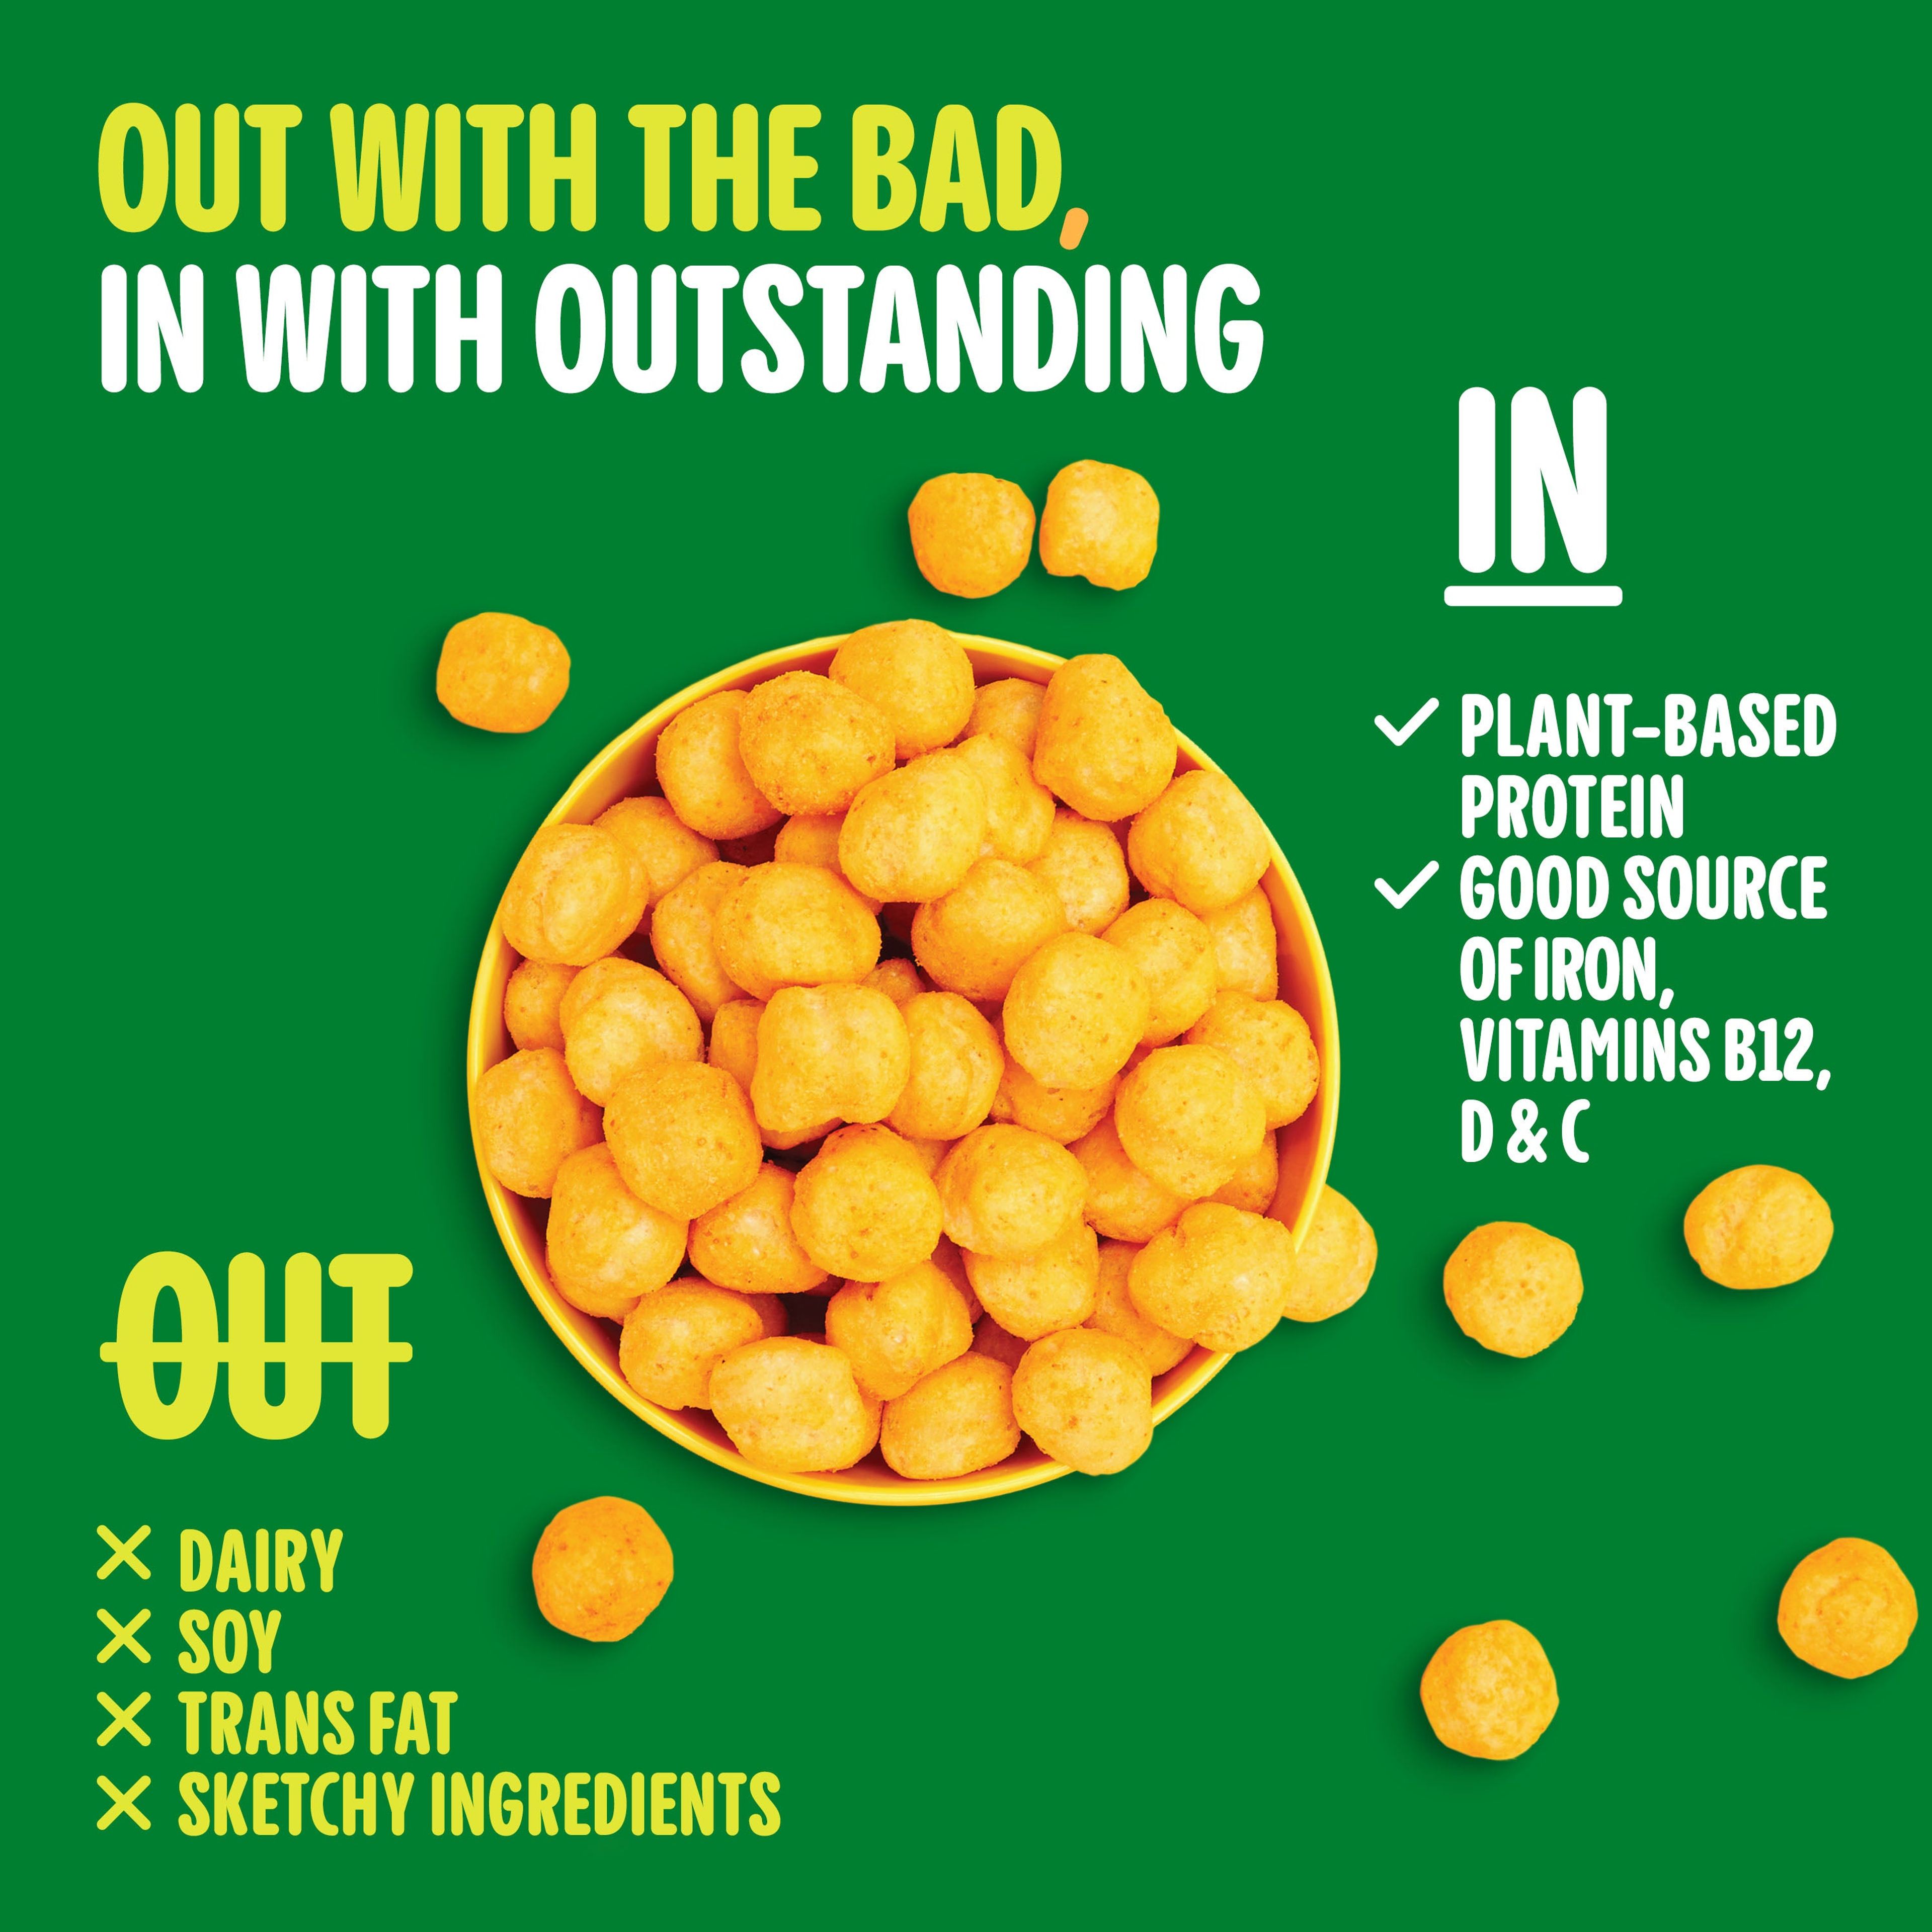 Outstanding Cheese Balls - Jalapeño Chedda / Snack Size 1.25oz / 8 Pack